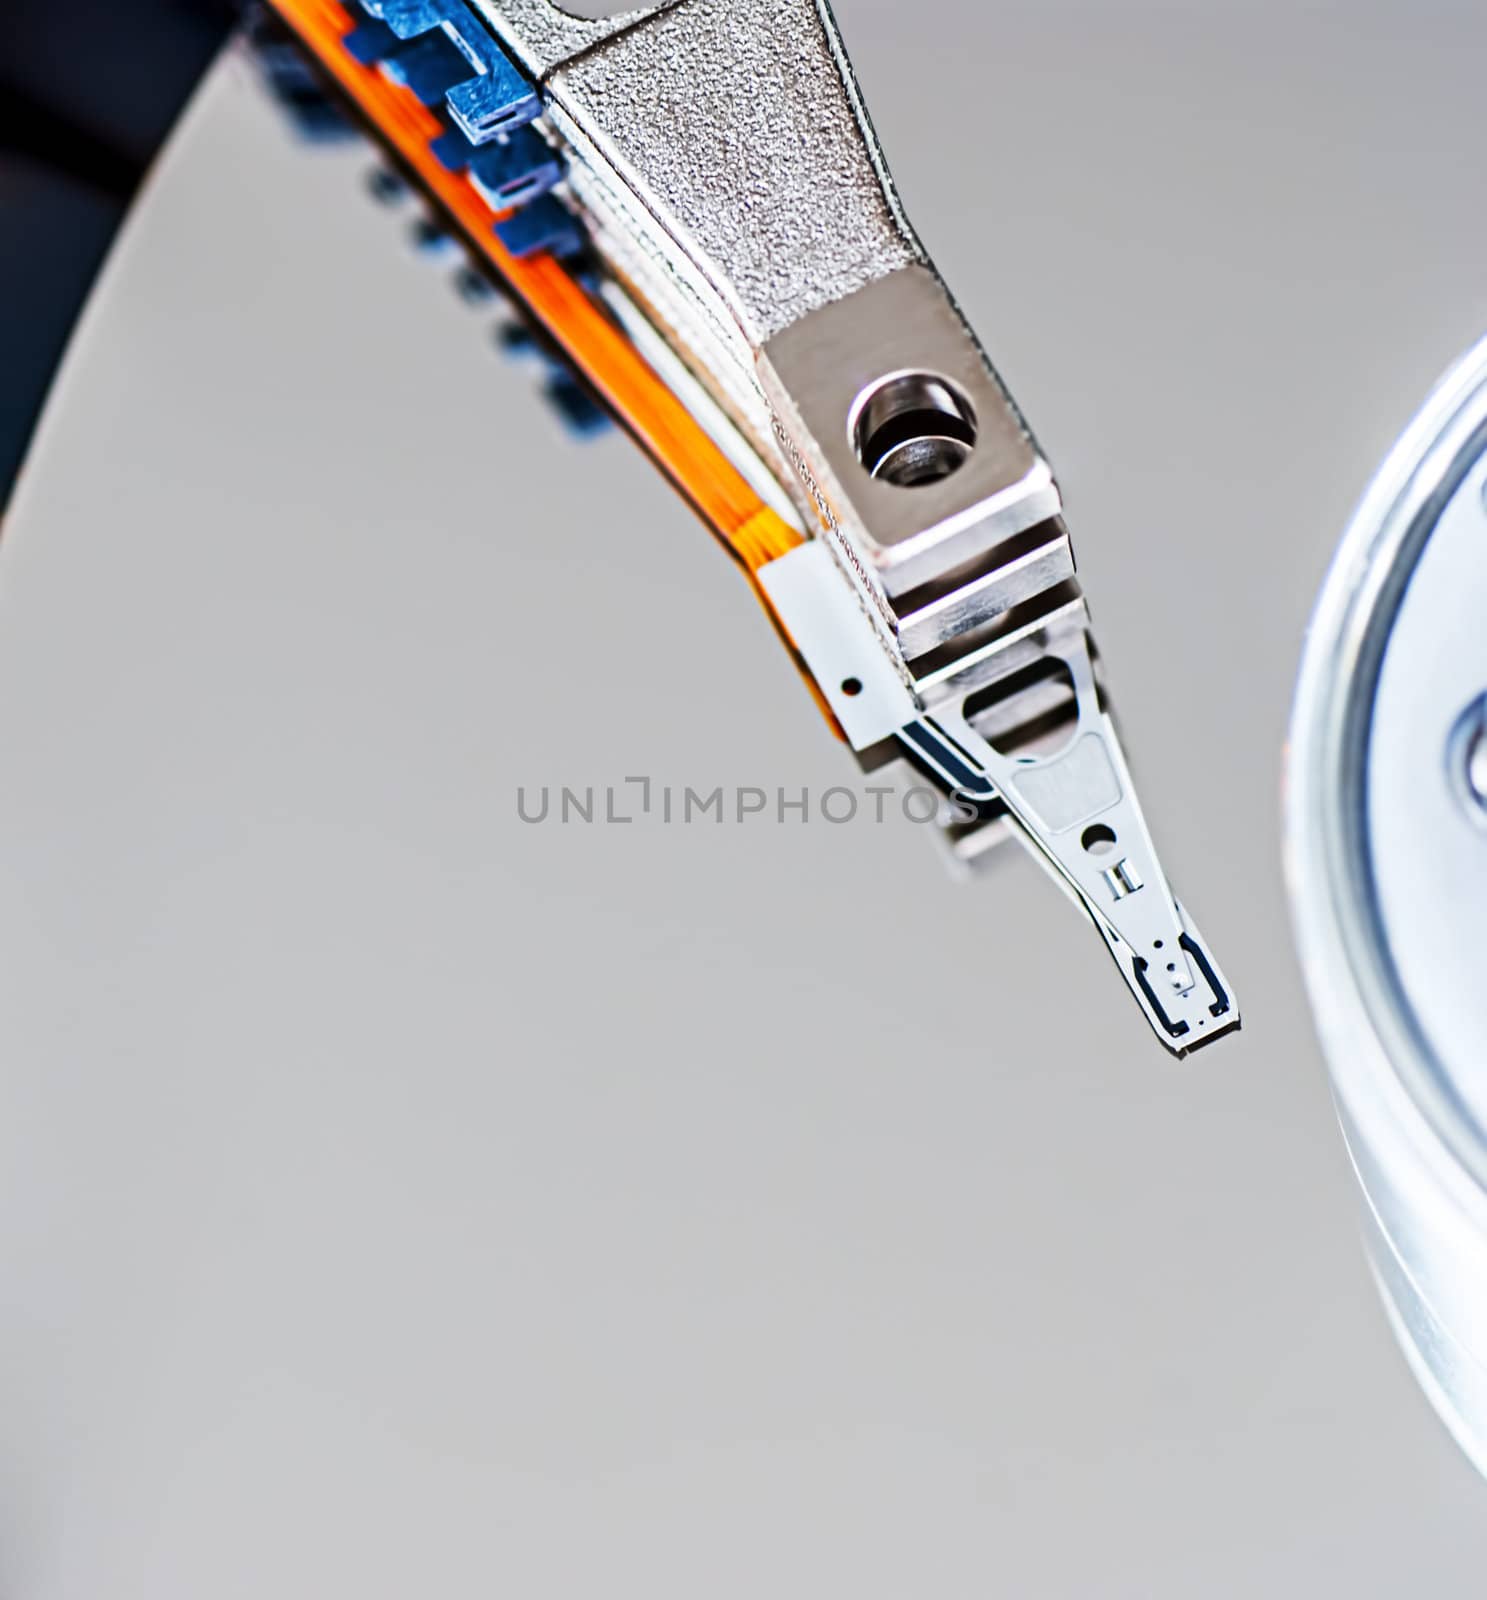 hard disk drive detail by Zhukow